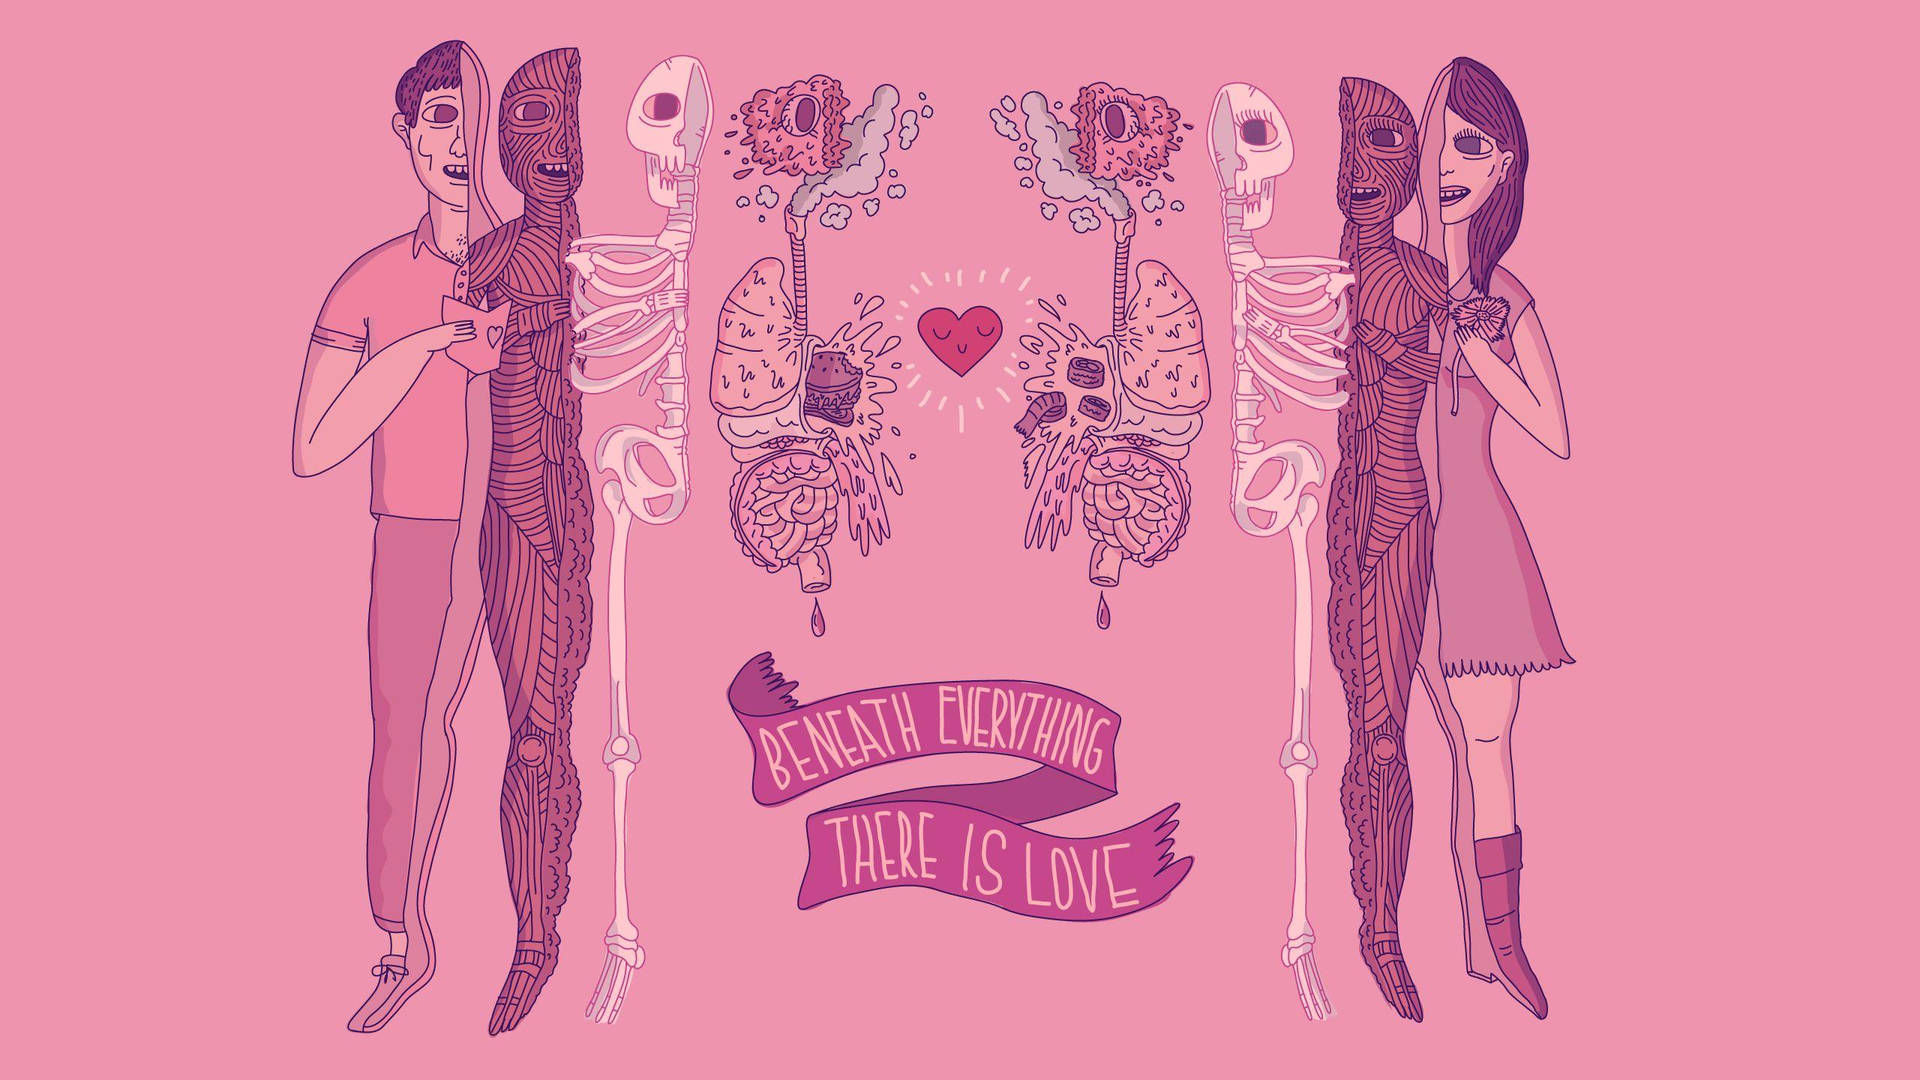 A Pastel Gore Graphic Art Of Human Body Parts Wallpaper